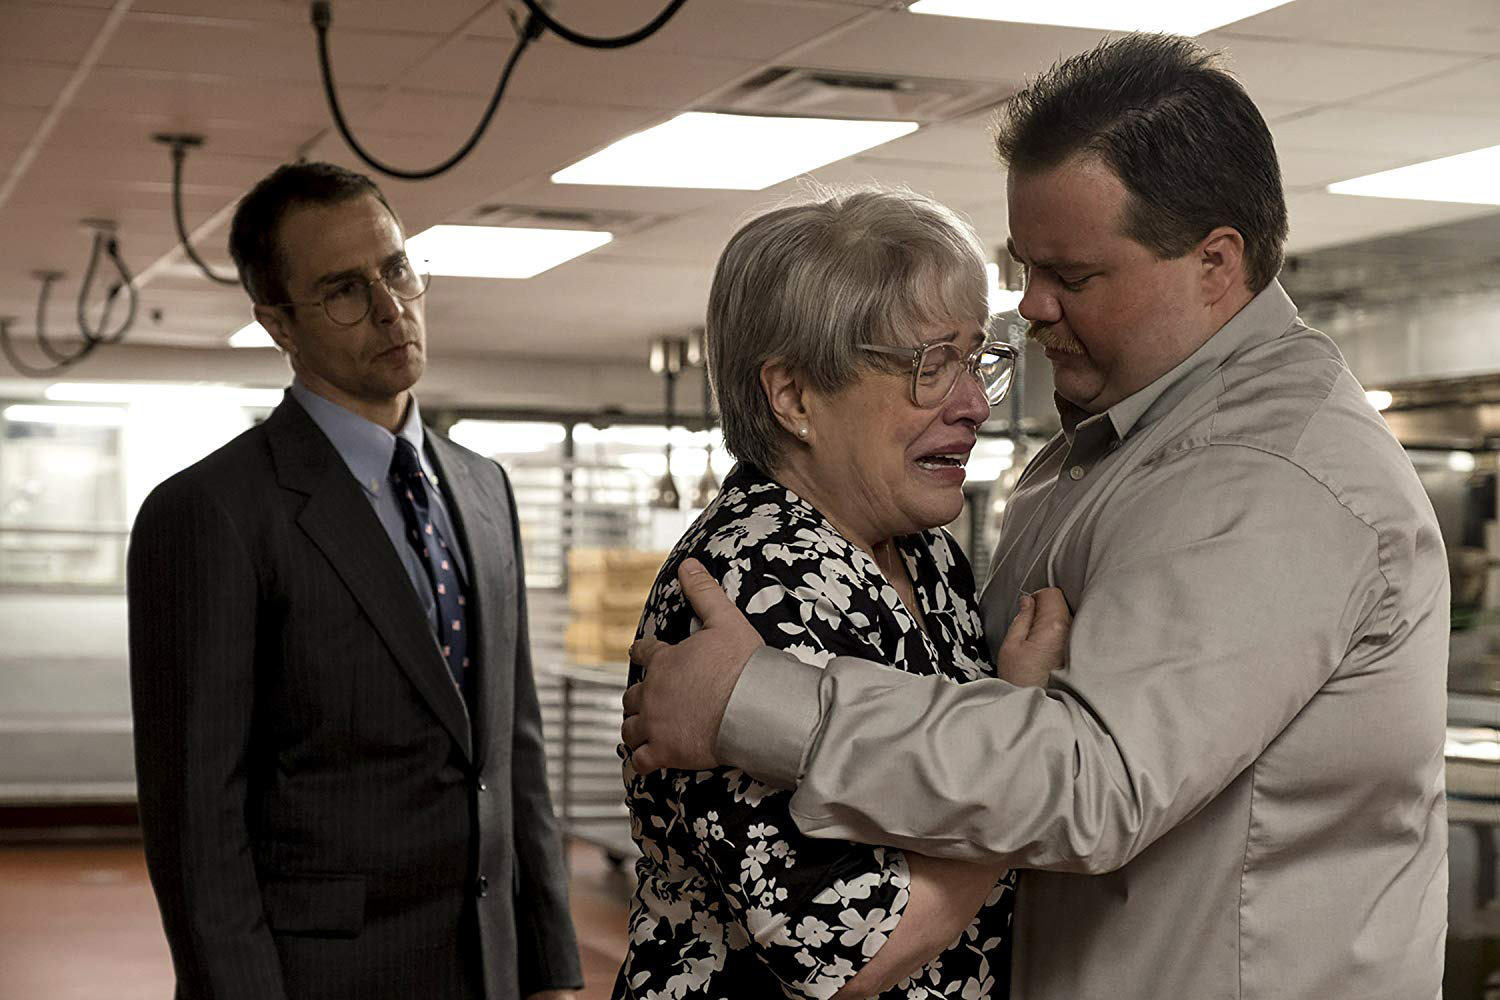 PHOTO: Kathy Bates, Sam Rockwell and Paul Walter Houser in a scene from the 2019 film, "Richard Jewell."